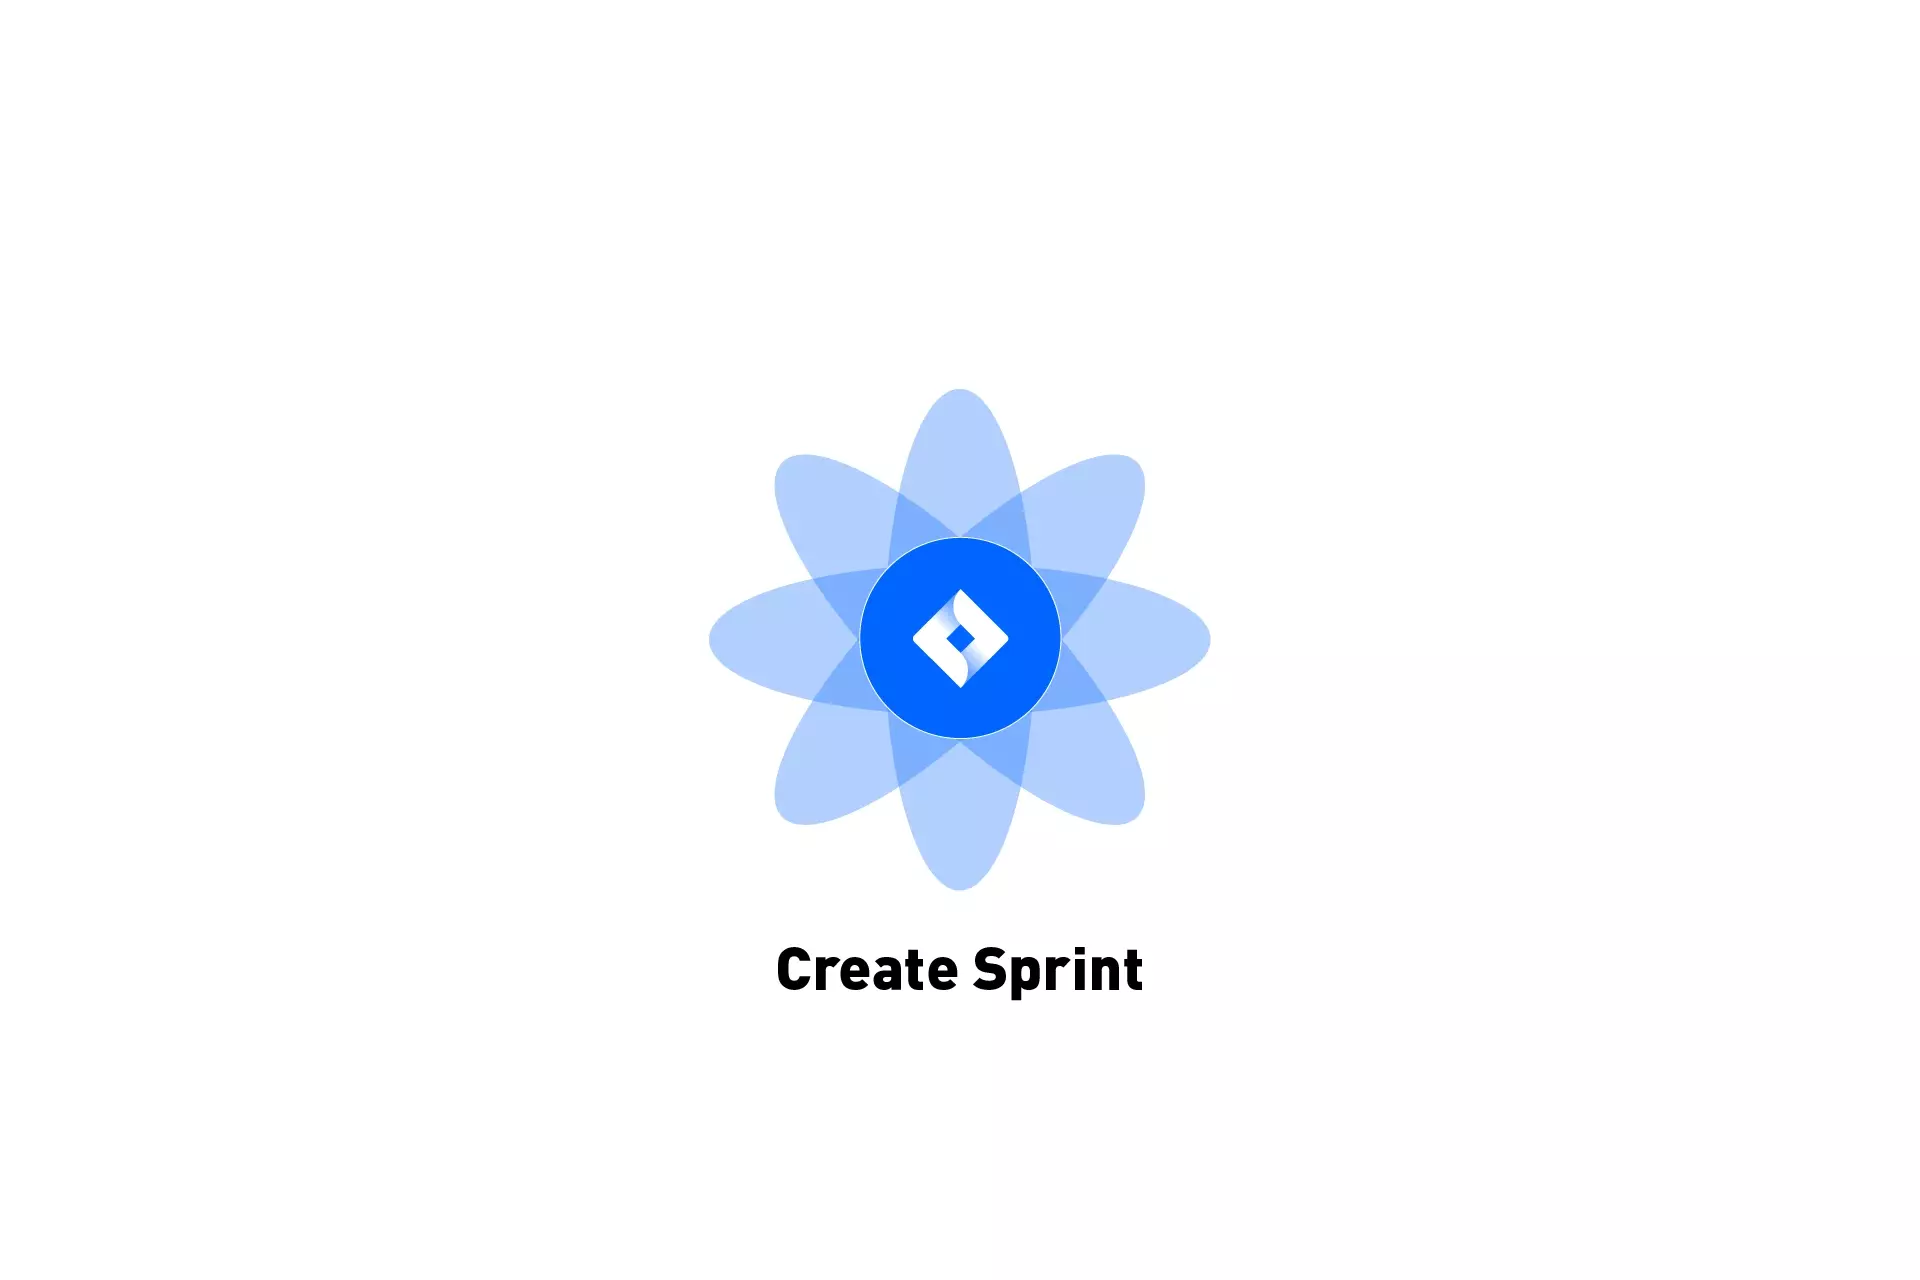 A flower that represents JIRA with the text "Create Sprint" beneath it.